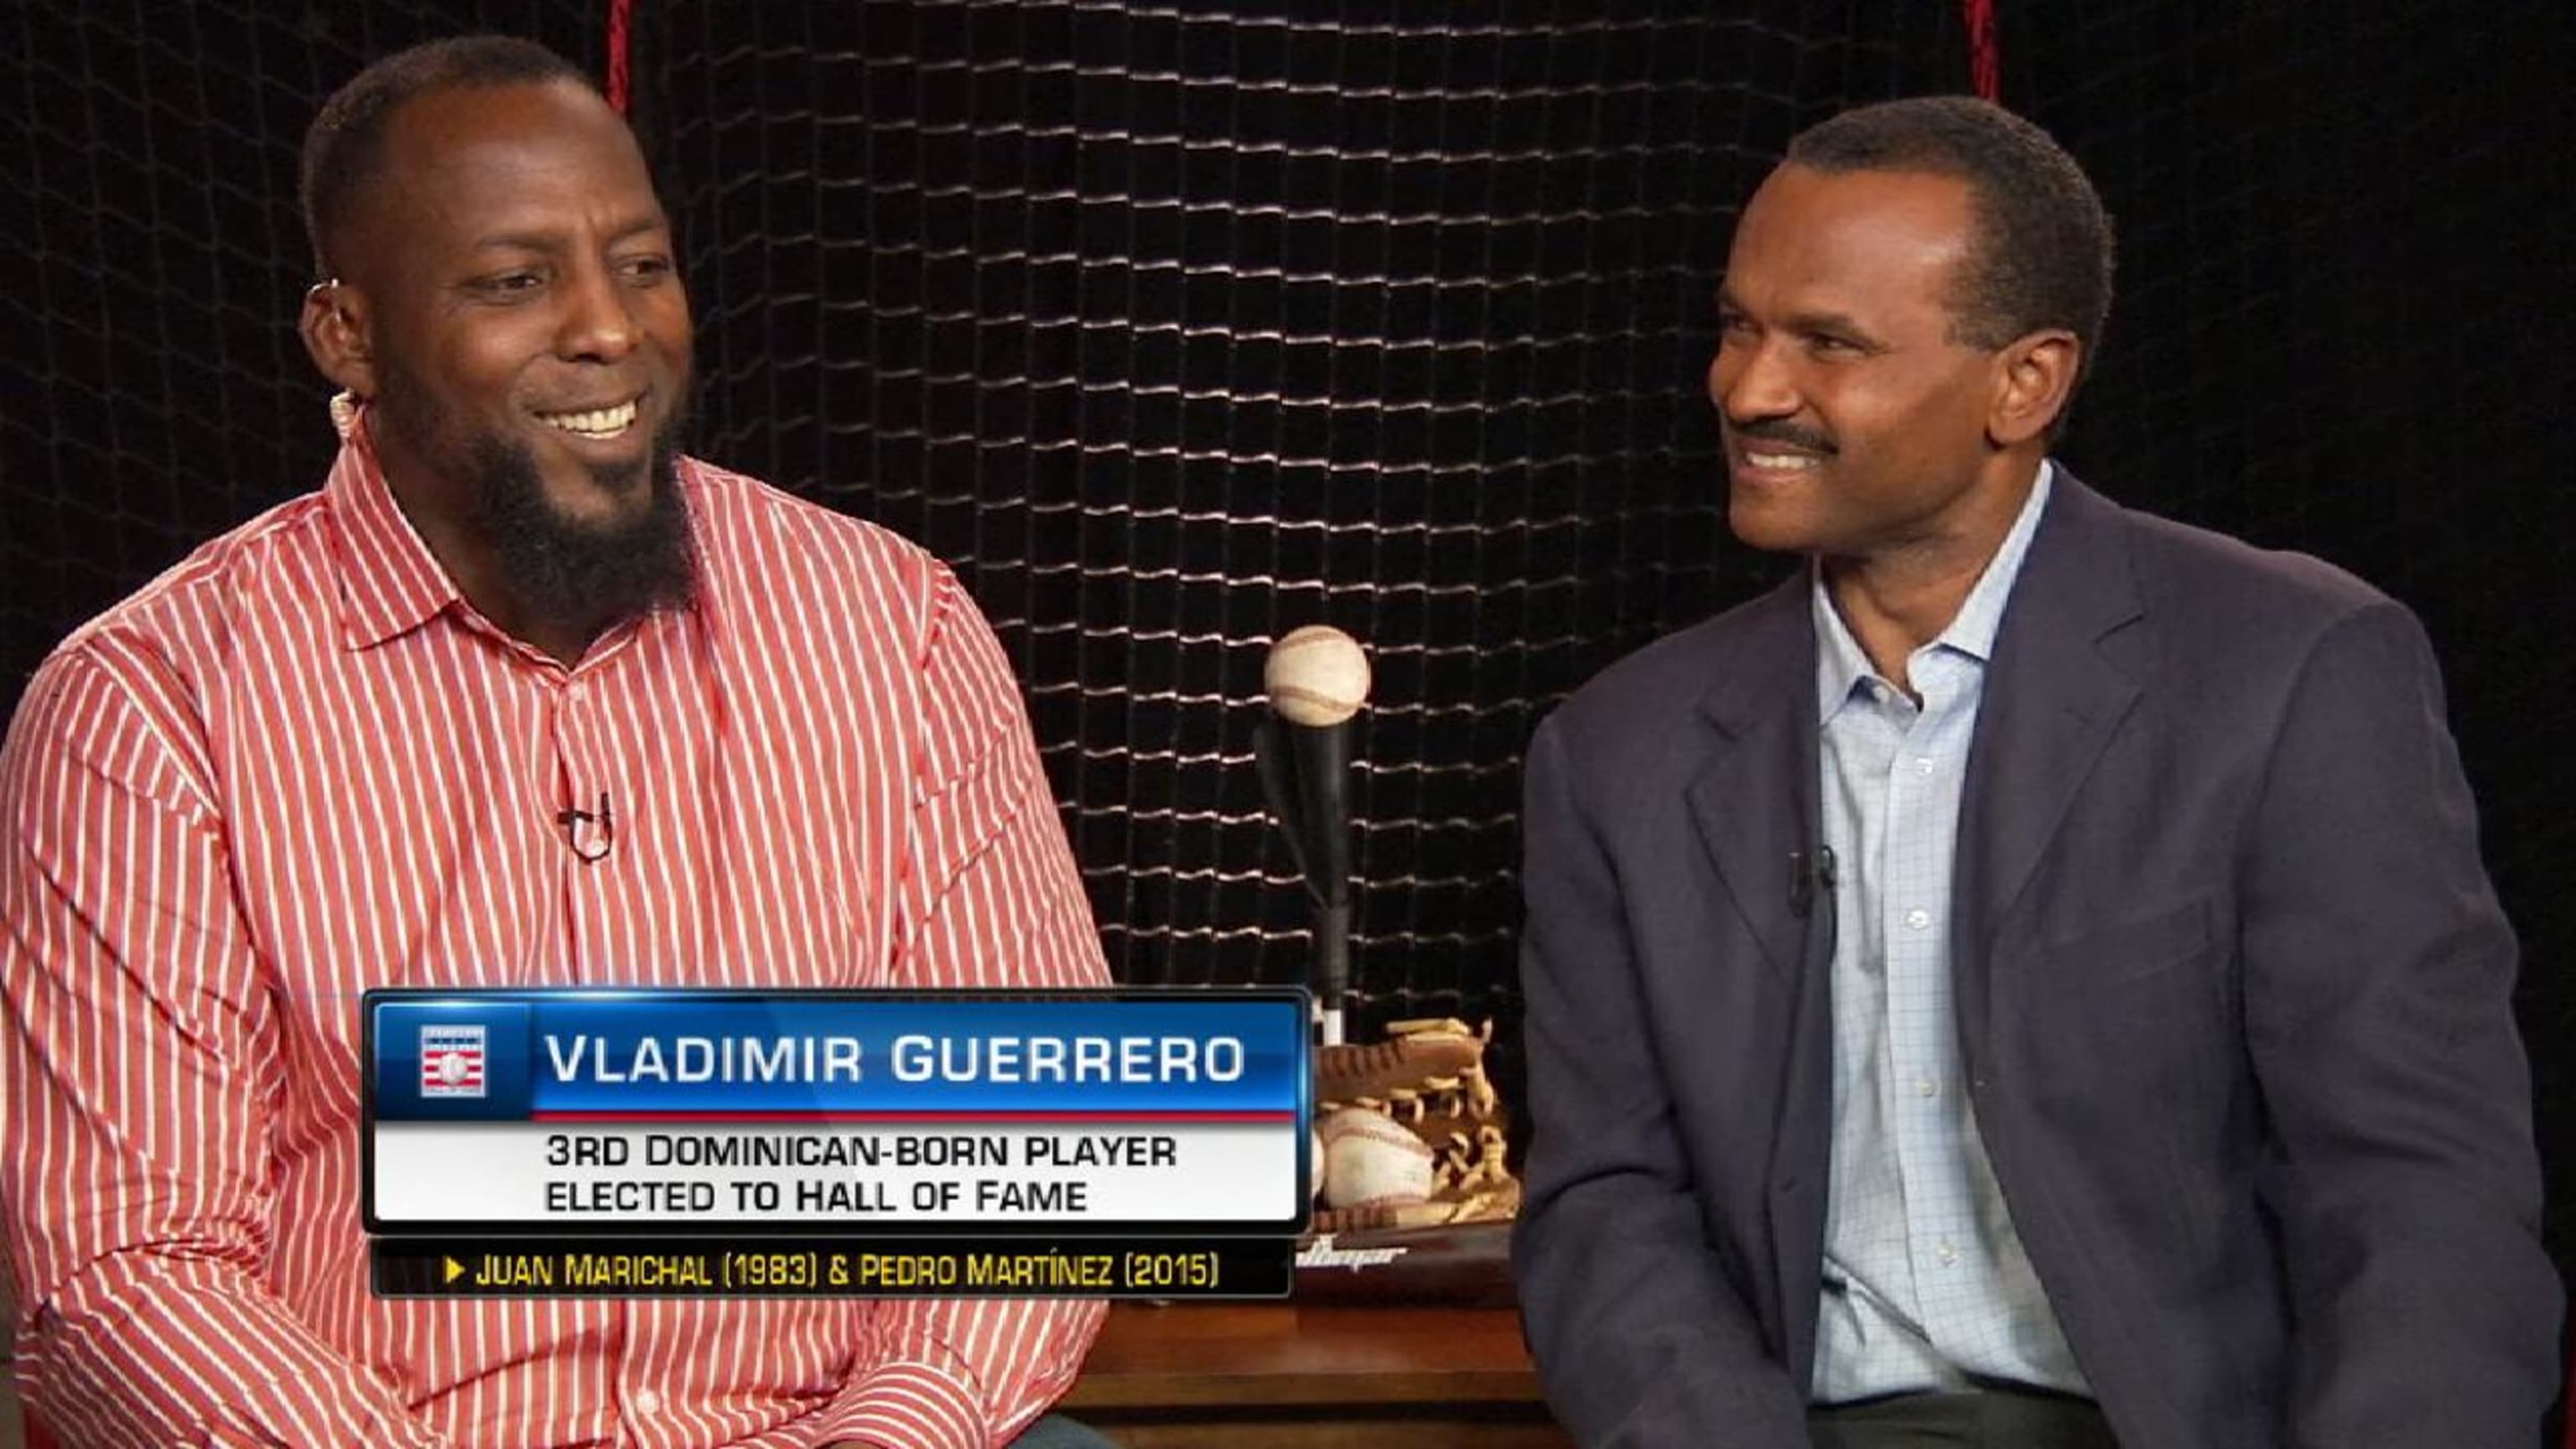 Vladimir Guerrero elected to Hall of Fame